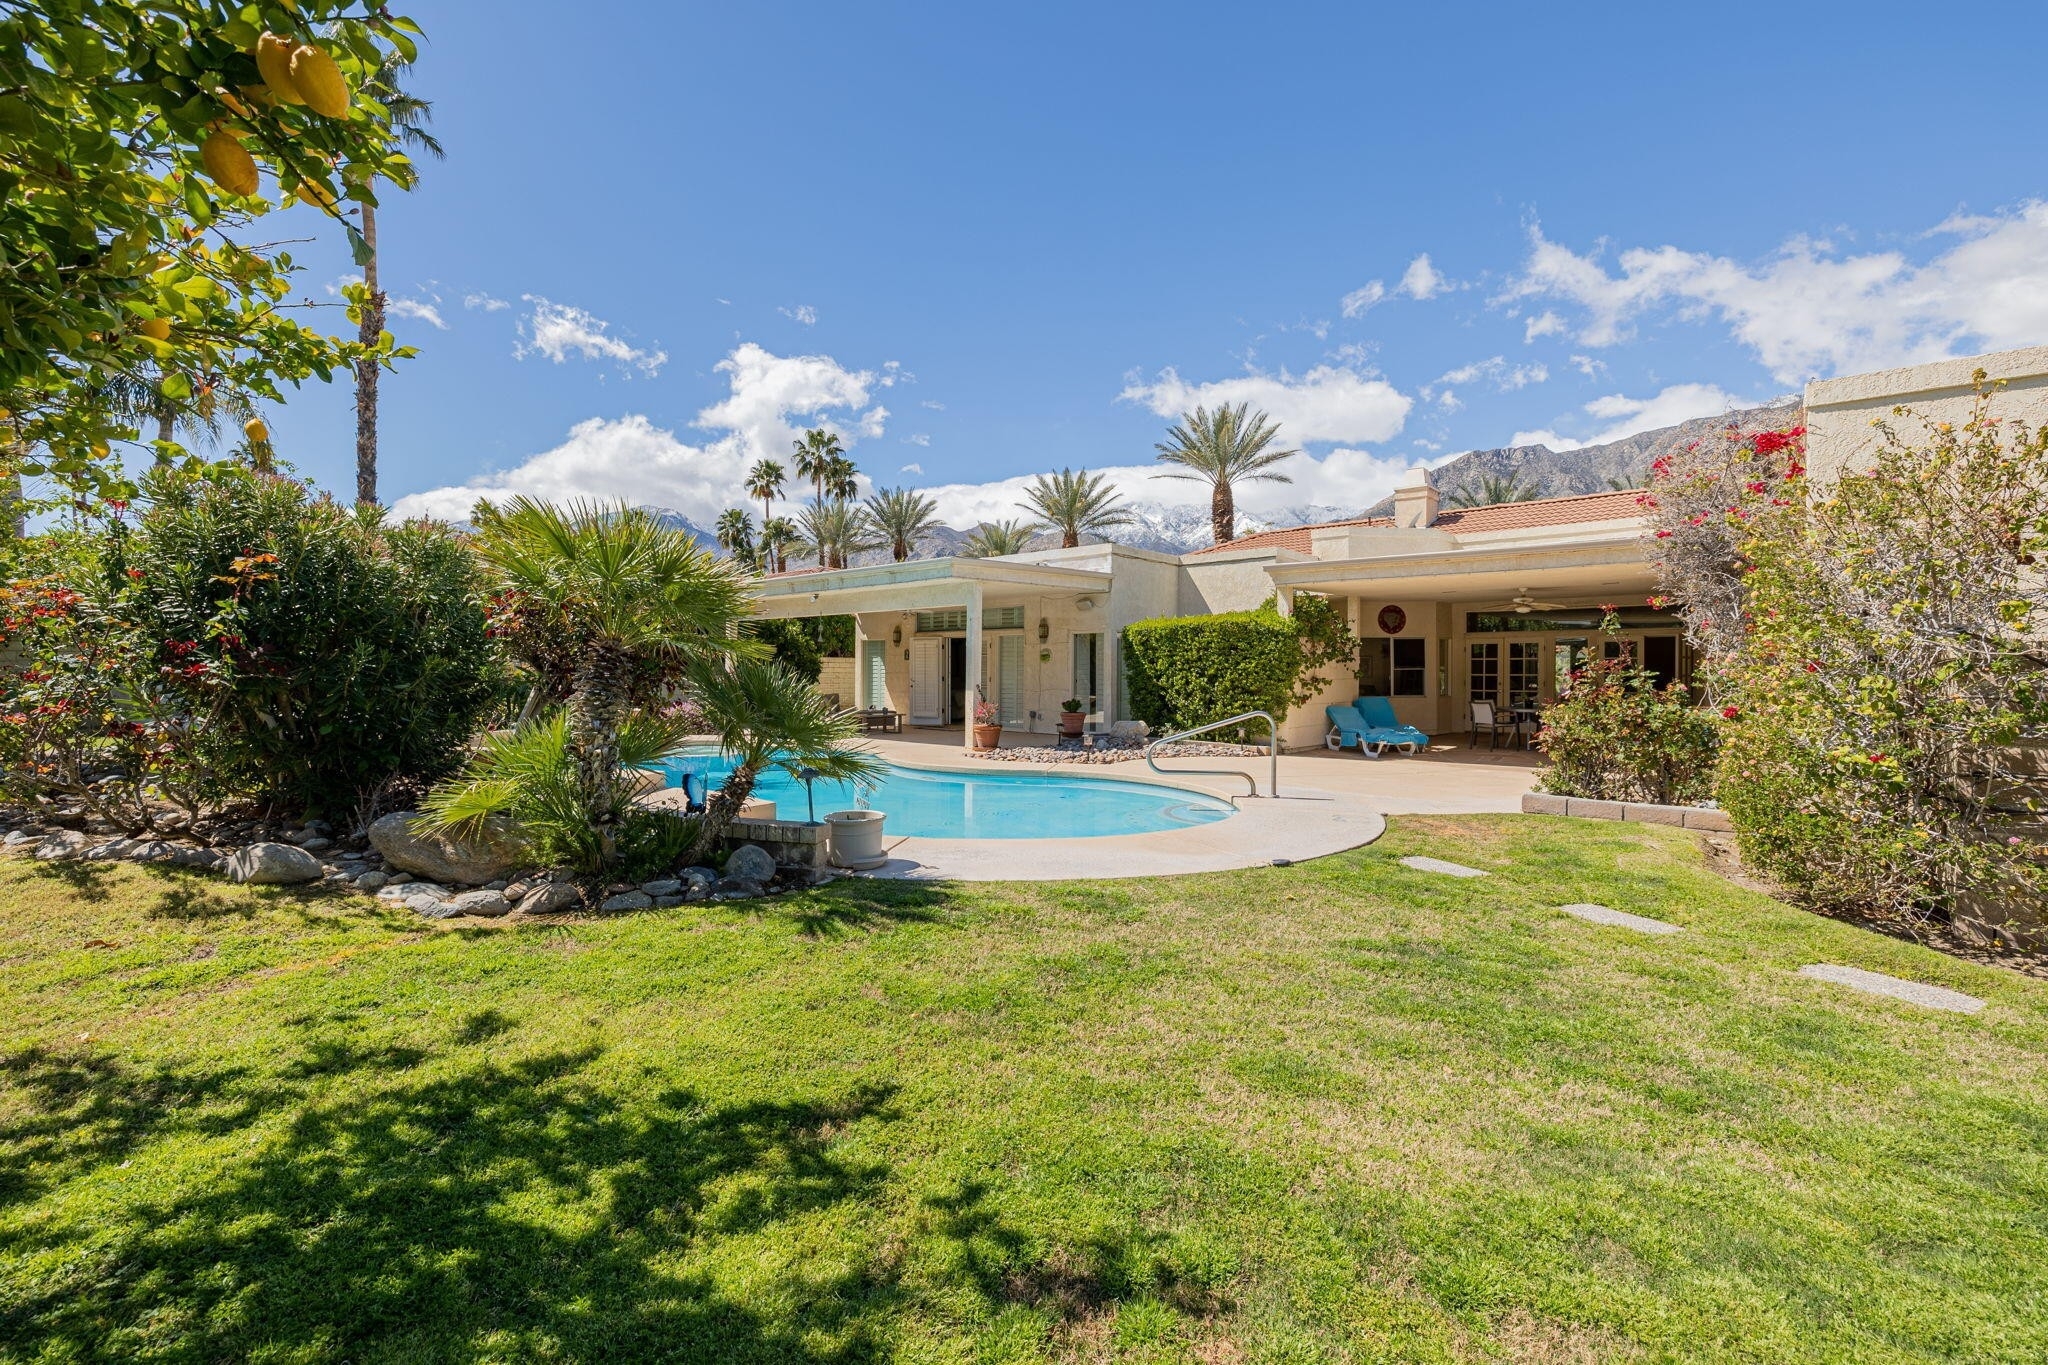 Single Family Home for Sale at Andreas Hills, Palm Springs, CA 92264